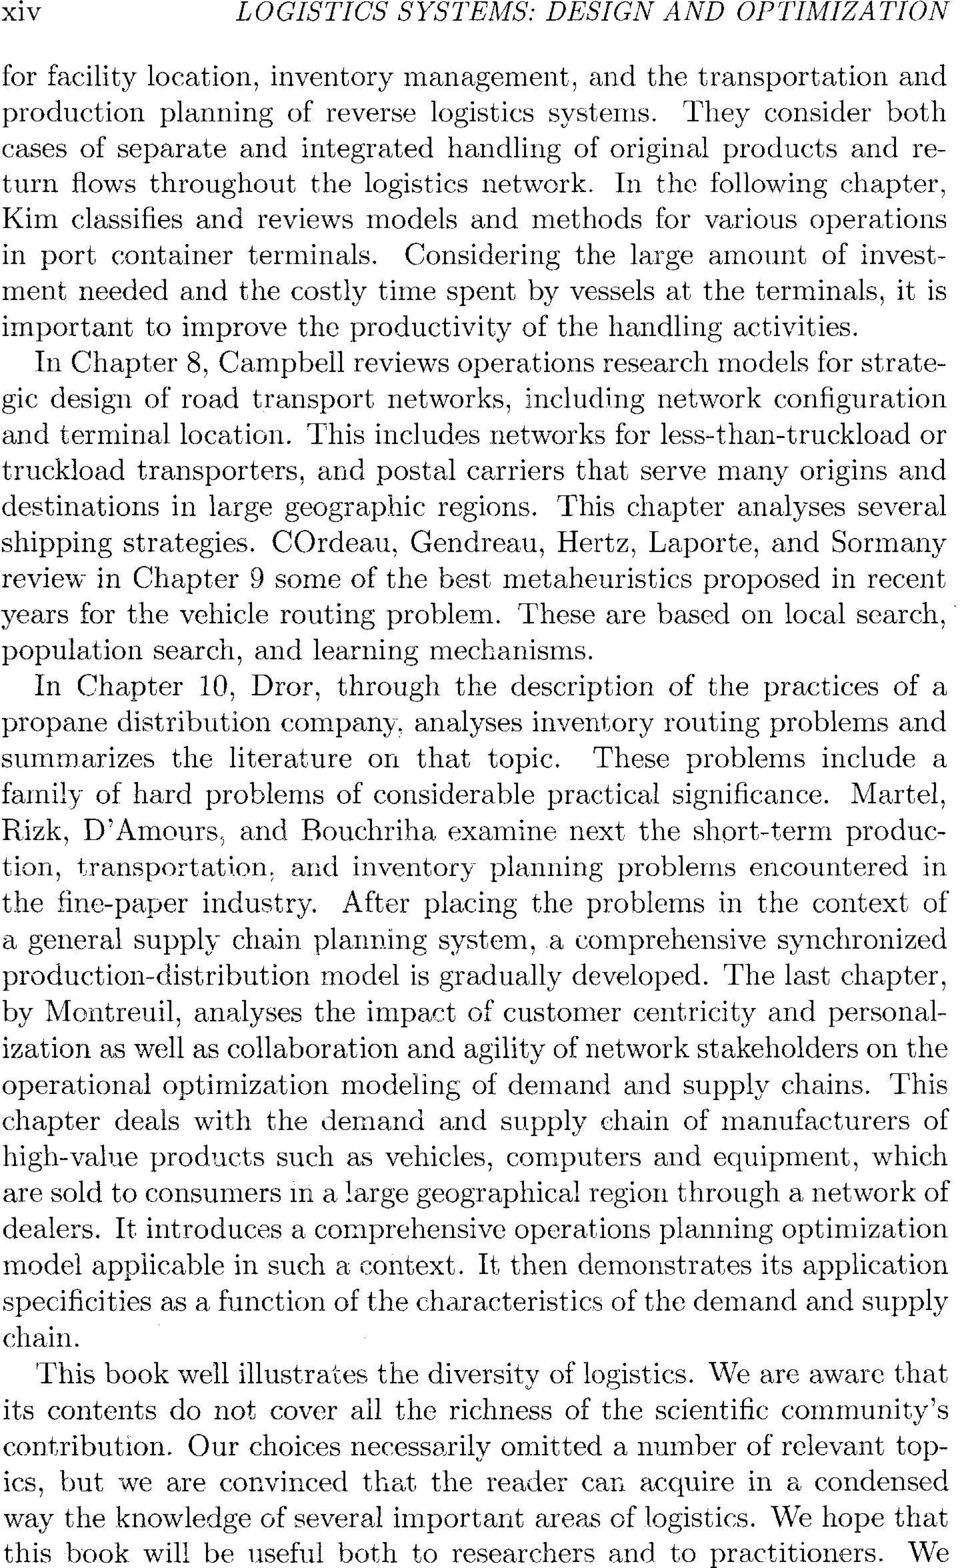 In the following chapter, Kim classifies and reviews models and methods for various operations in port container terminals.